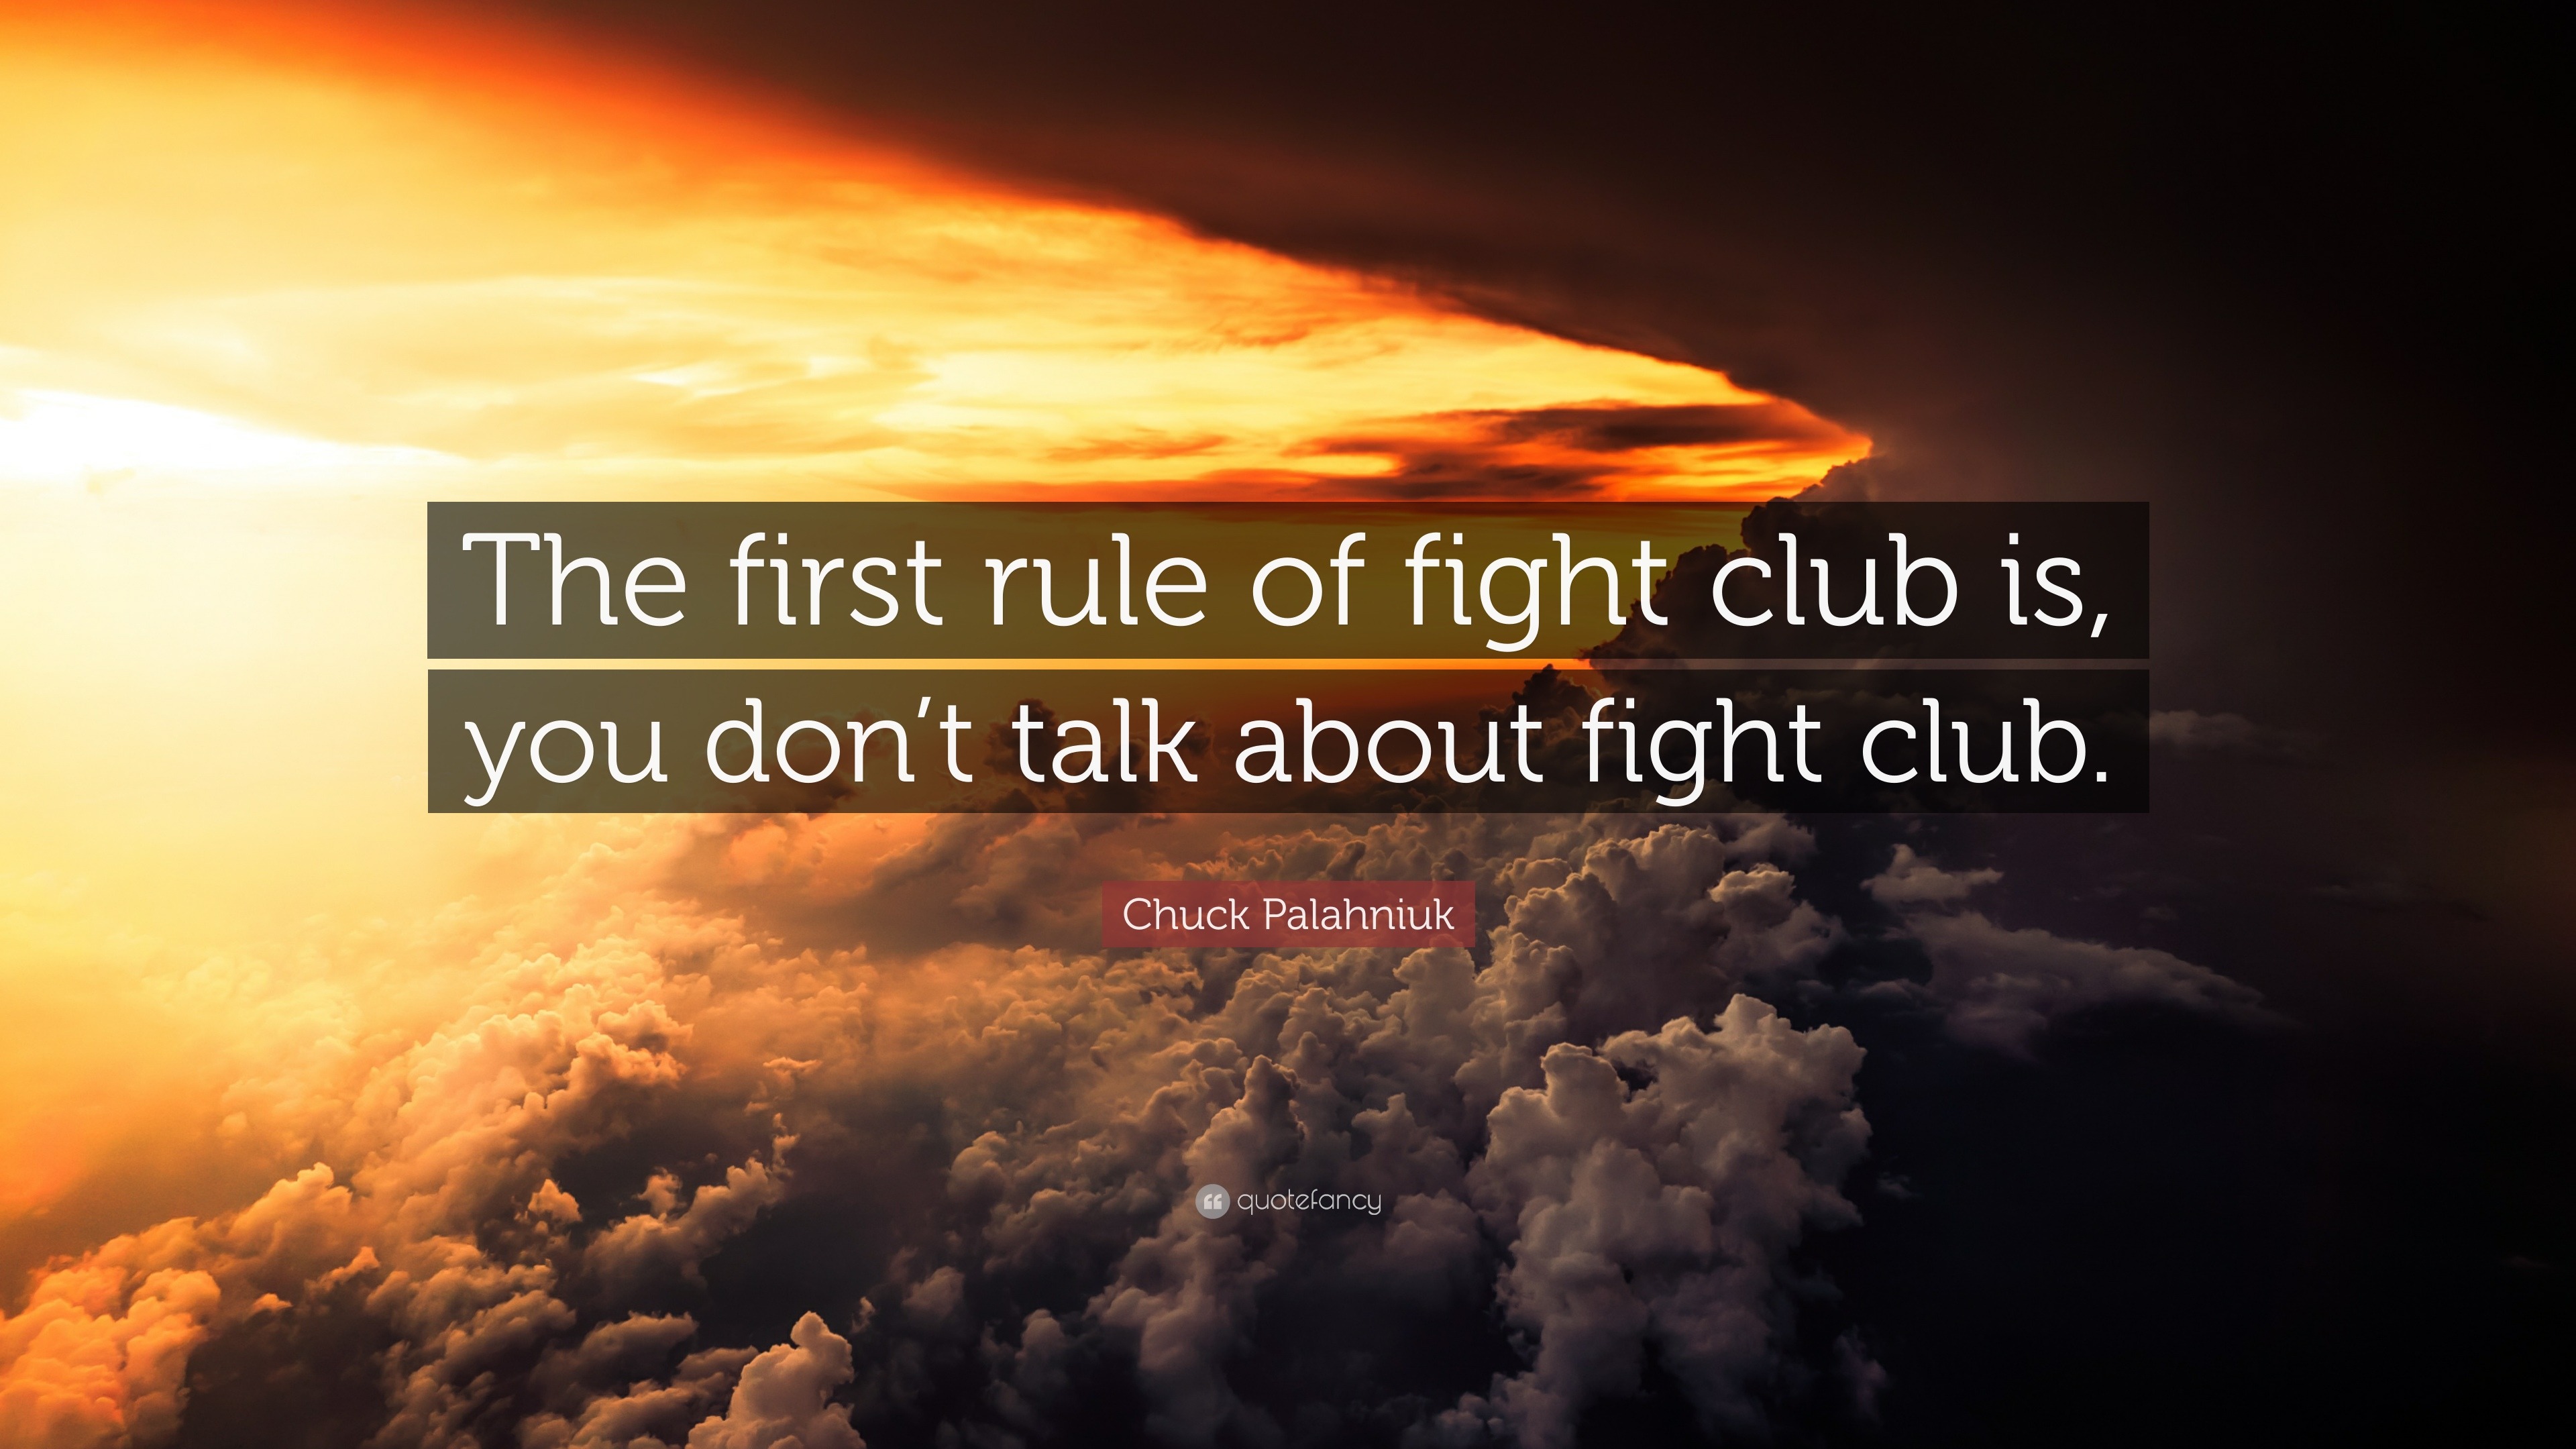 Chuck Palahniuk Quote: “The first rule of fight club is, you don’t talk ...